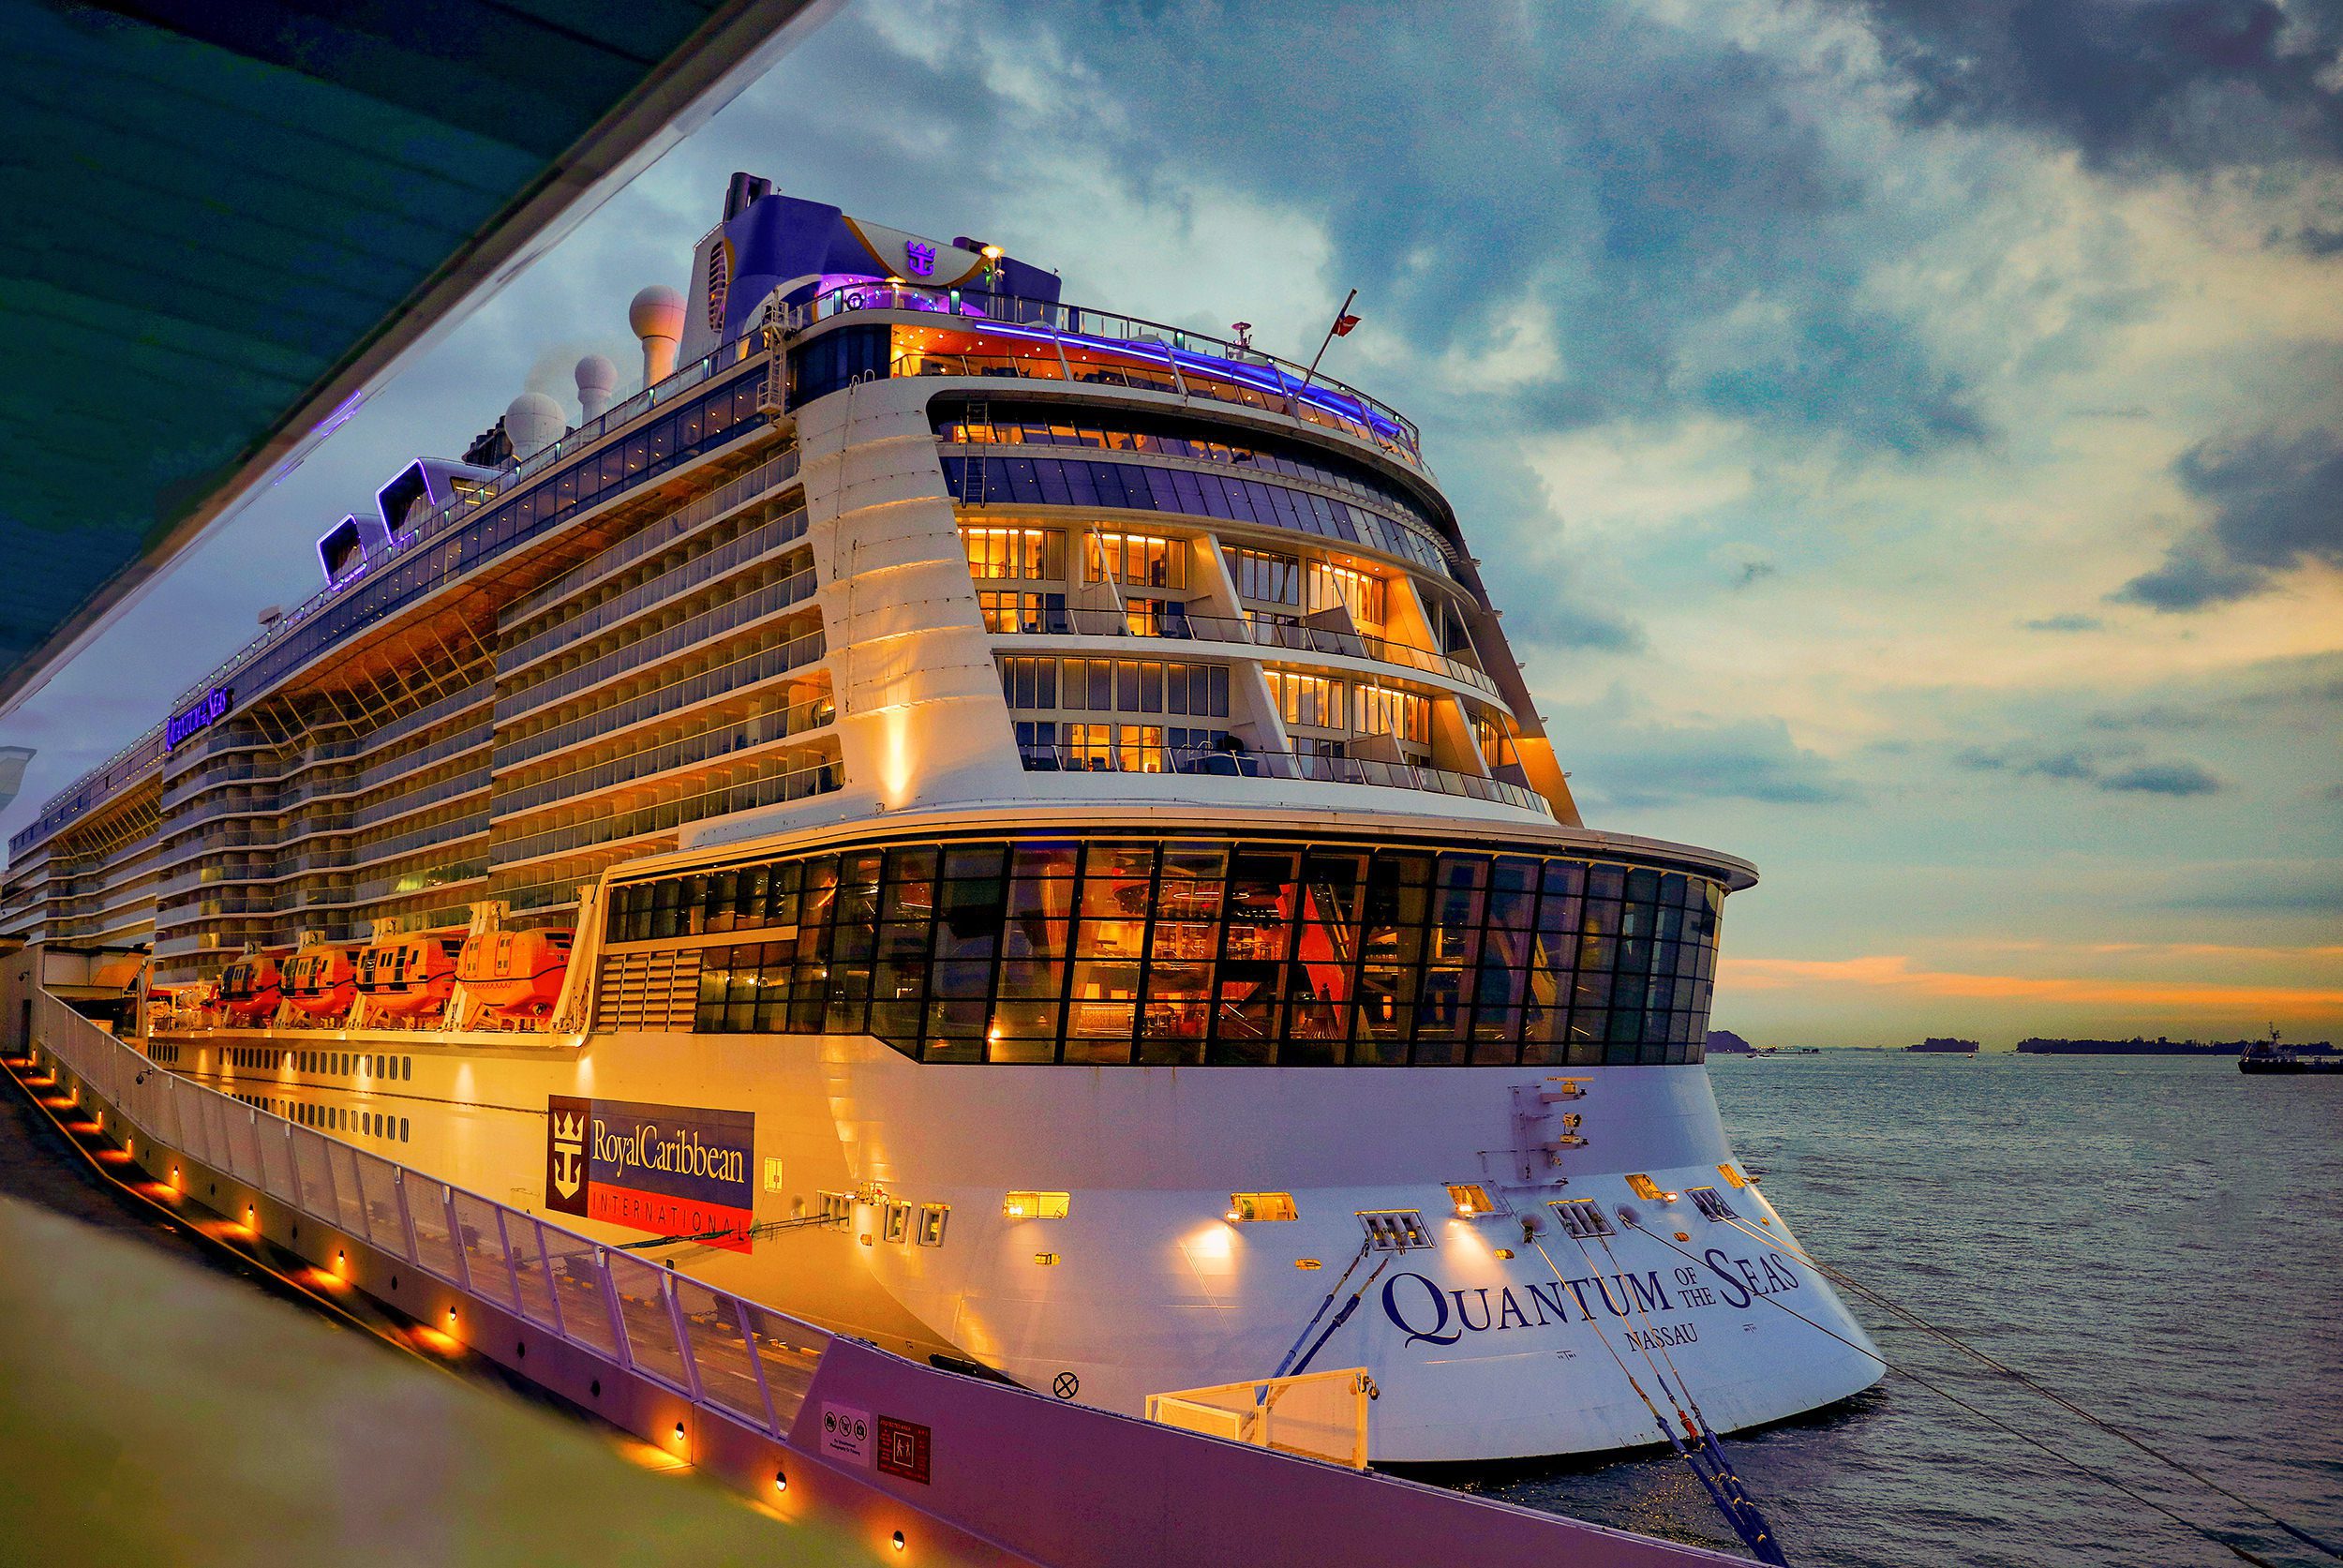 RCL Quantum of the Seas cruise ship moored in Singapore